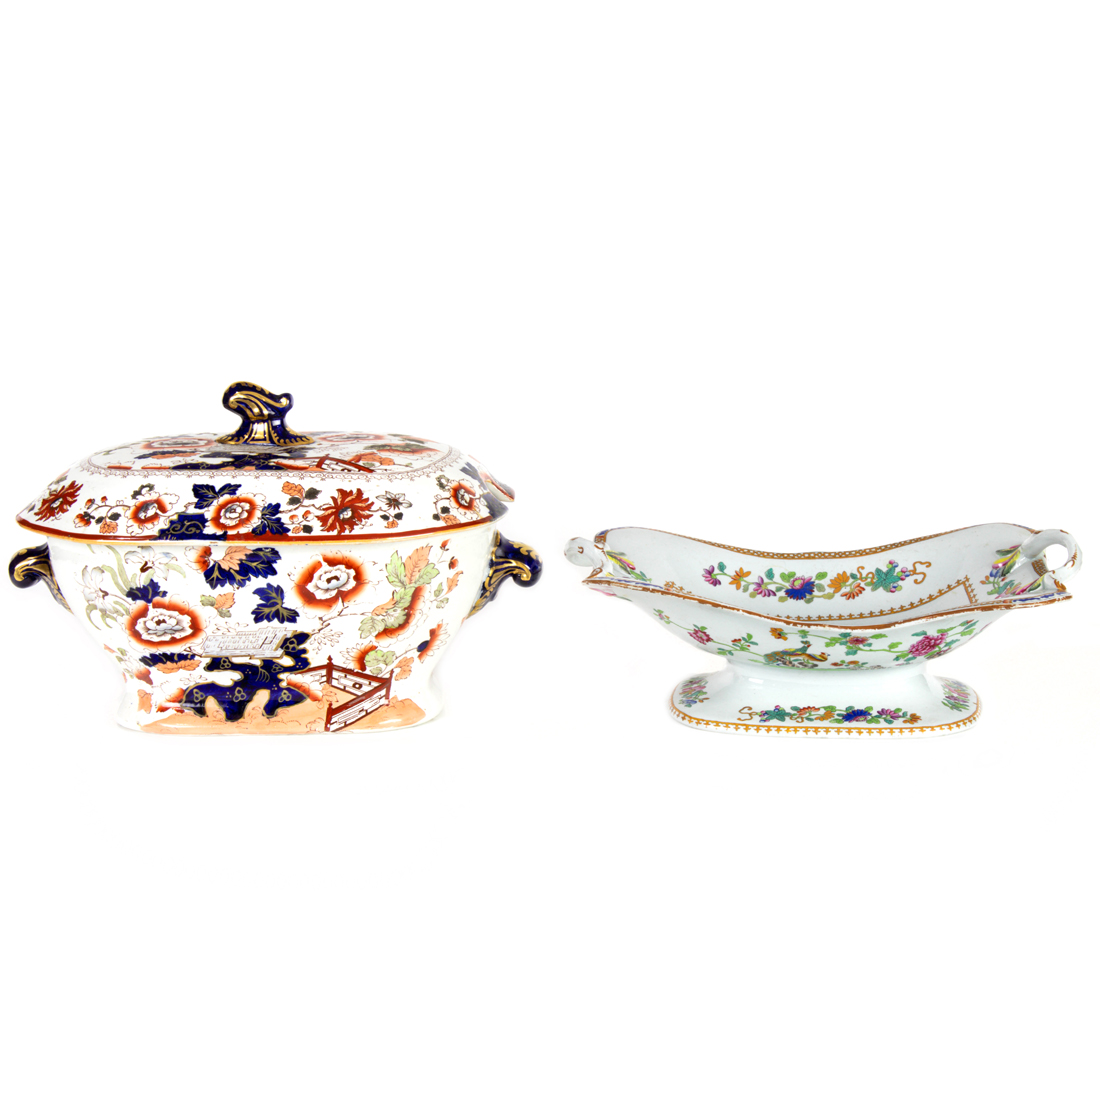 AN ENGLISH IRONSTONE TUREEN AND 3a1d3f